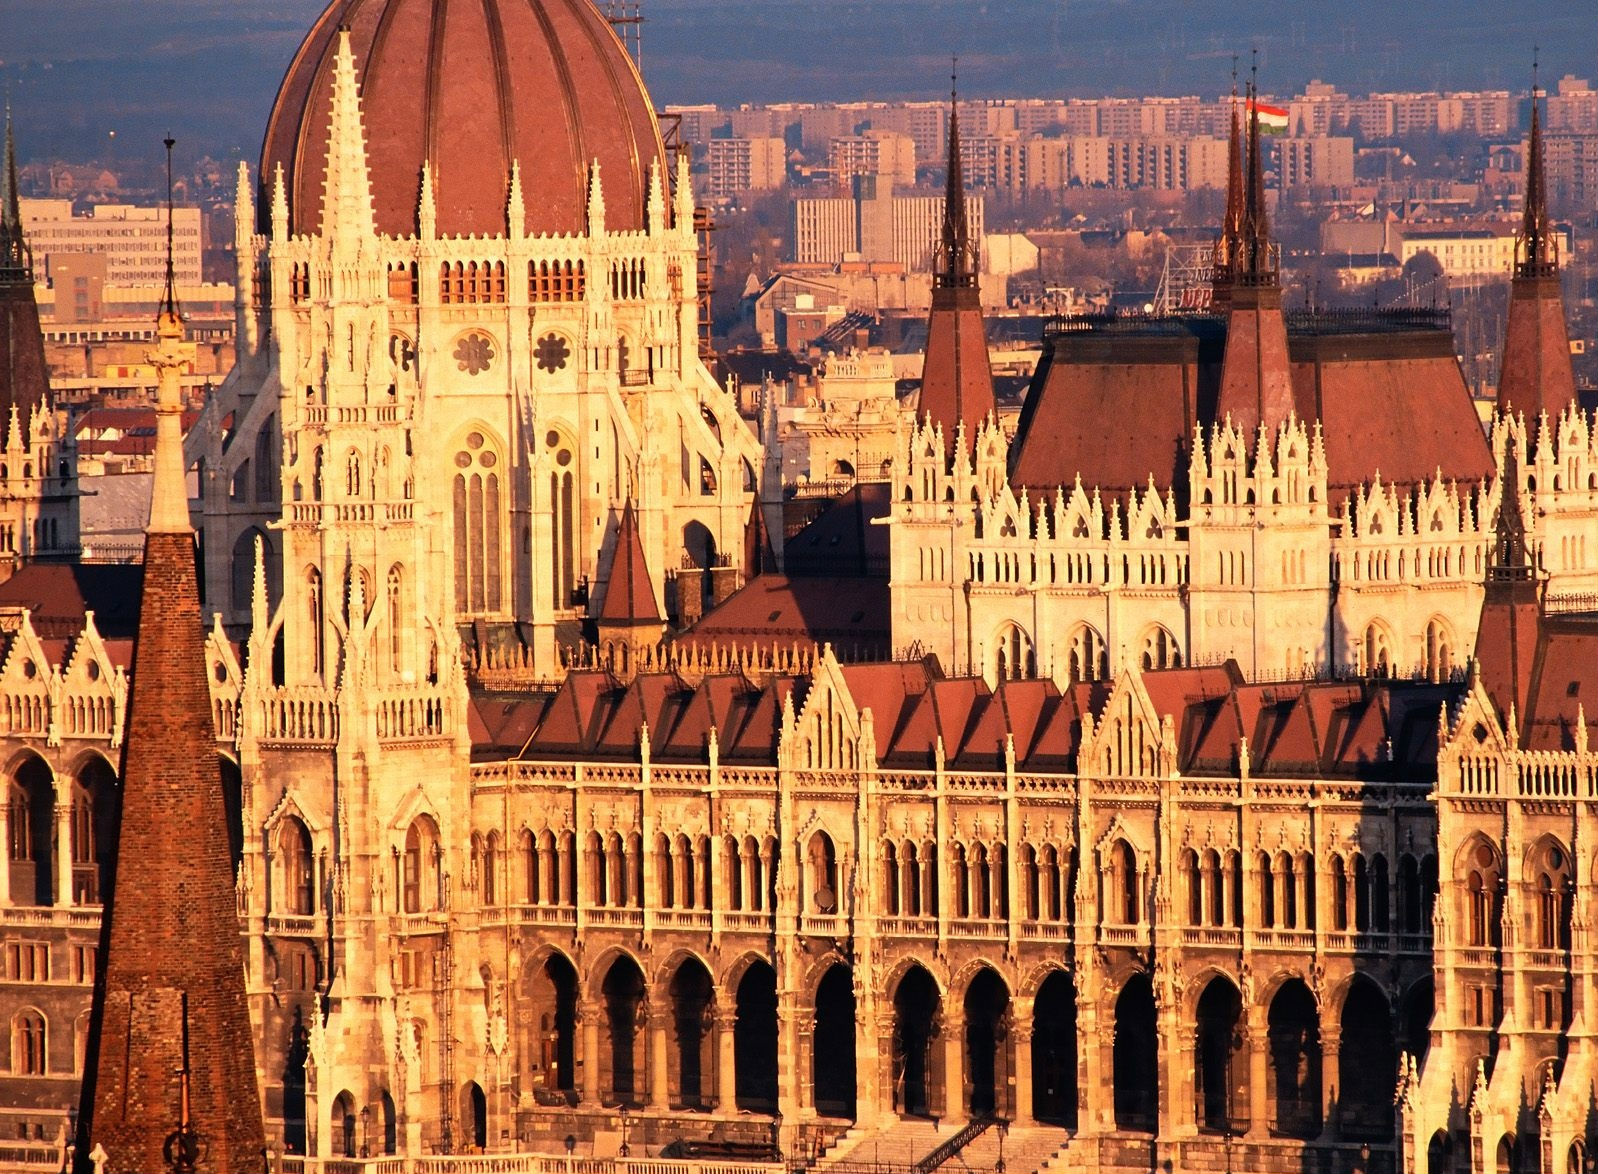 Parliament Budapest, Hungary: stunning HD desktop wallpaper with iconic architecture at sunset.